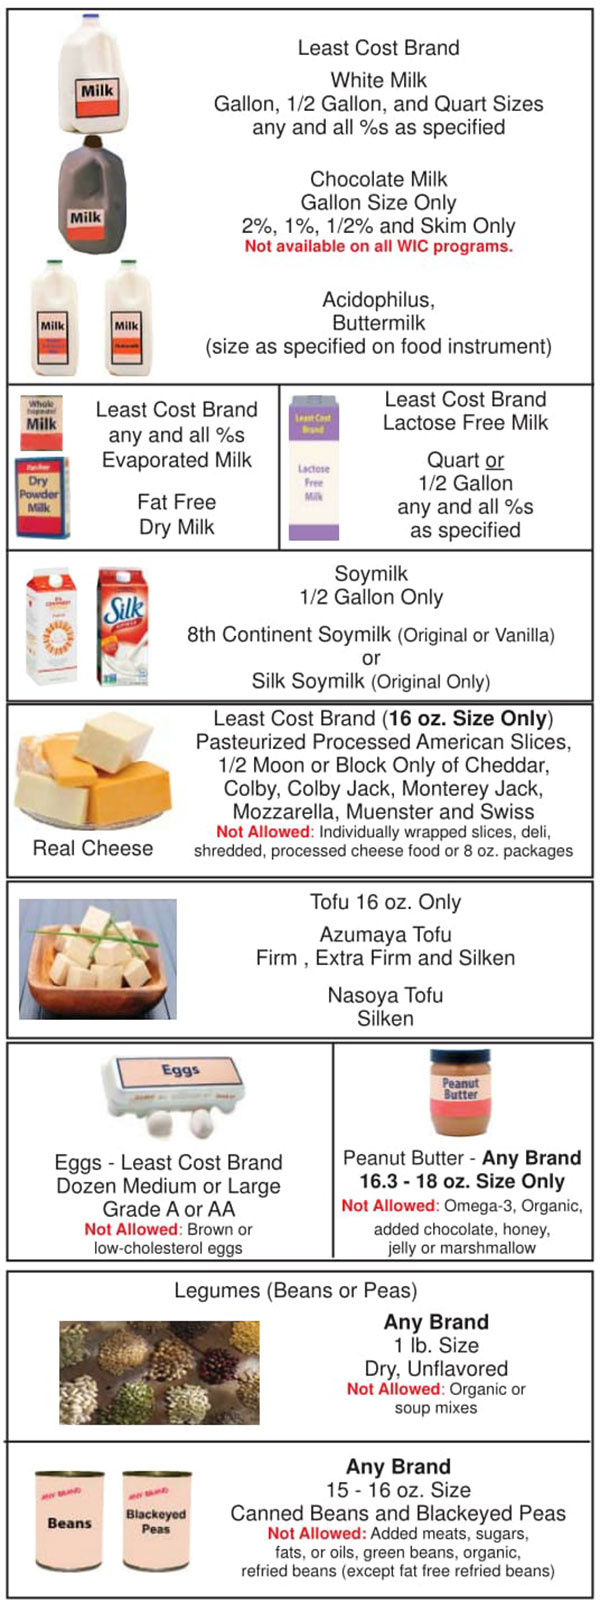 Oklahoma WIC Food List White Milk, Chocolate Milk, Fat Free Dry Milk, Soy Milk, Cheese, Tofu, Eggs, Peanut Butter, Beans, Peas and Canned Beans